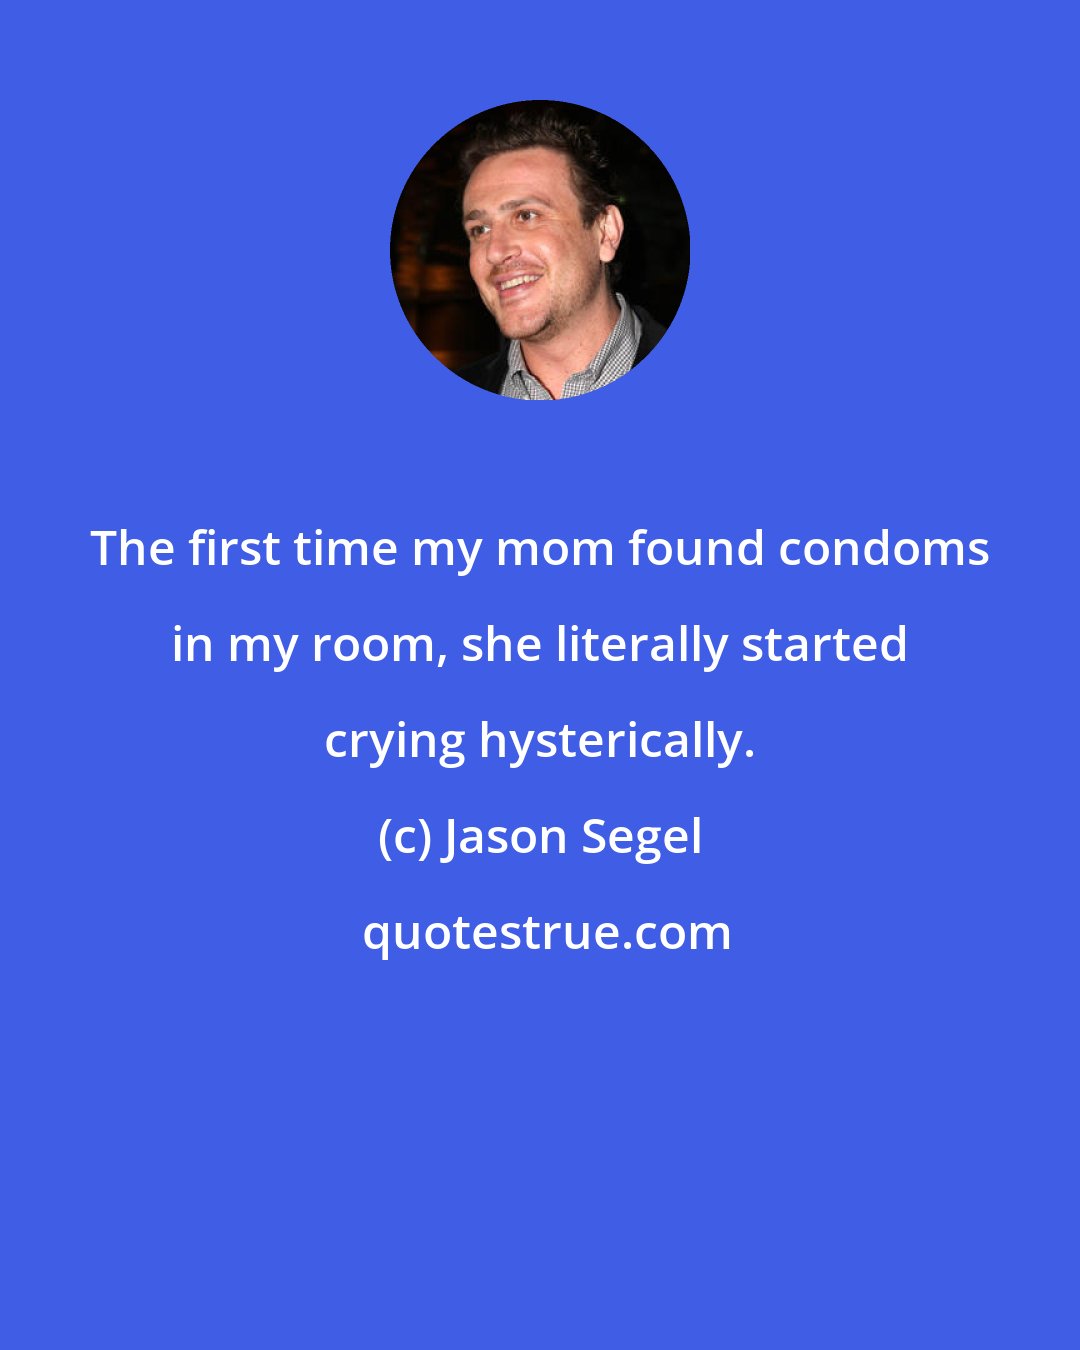 Jason Segel: The first time my mom found condoms in my room, she literally started crying hysterically.